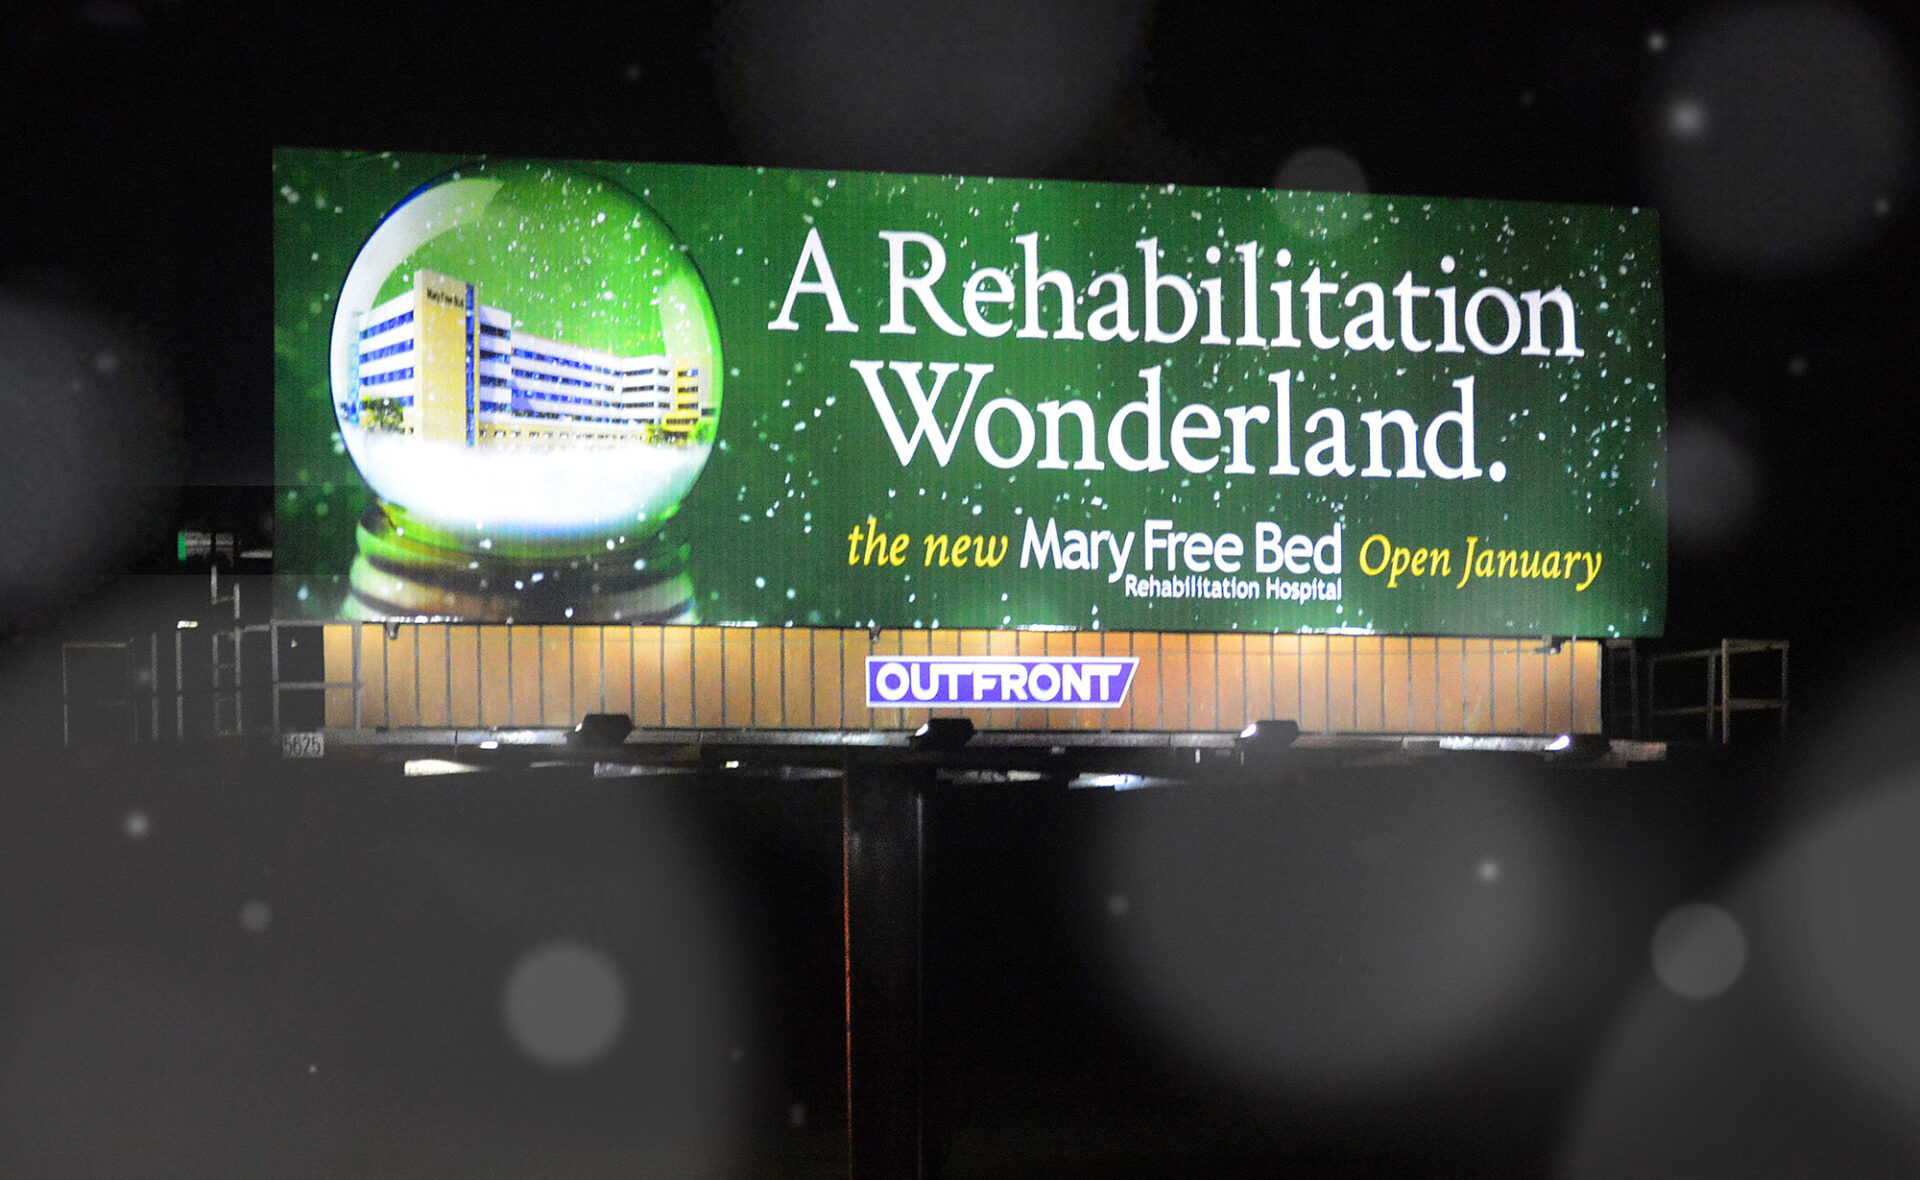 Out of home bulletin for Mary Free Bed. A rehabilitation wonderland